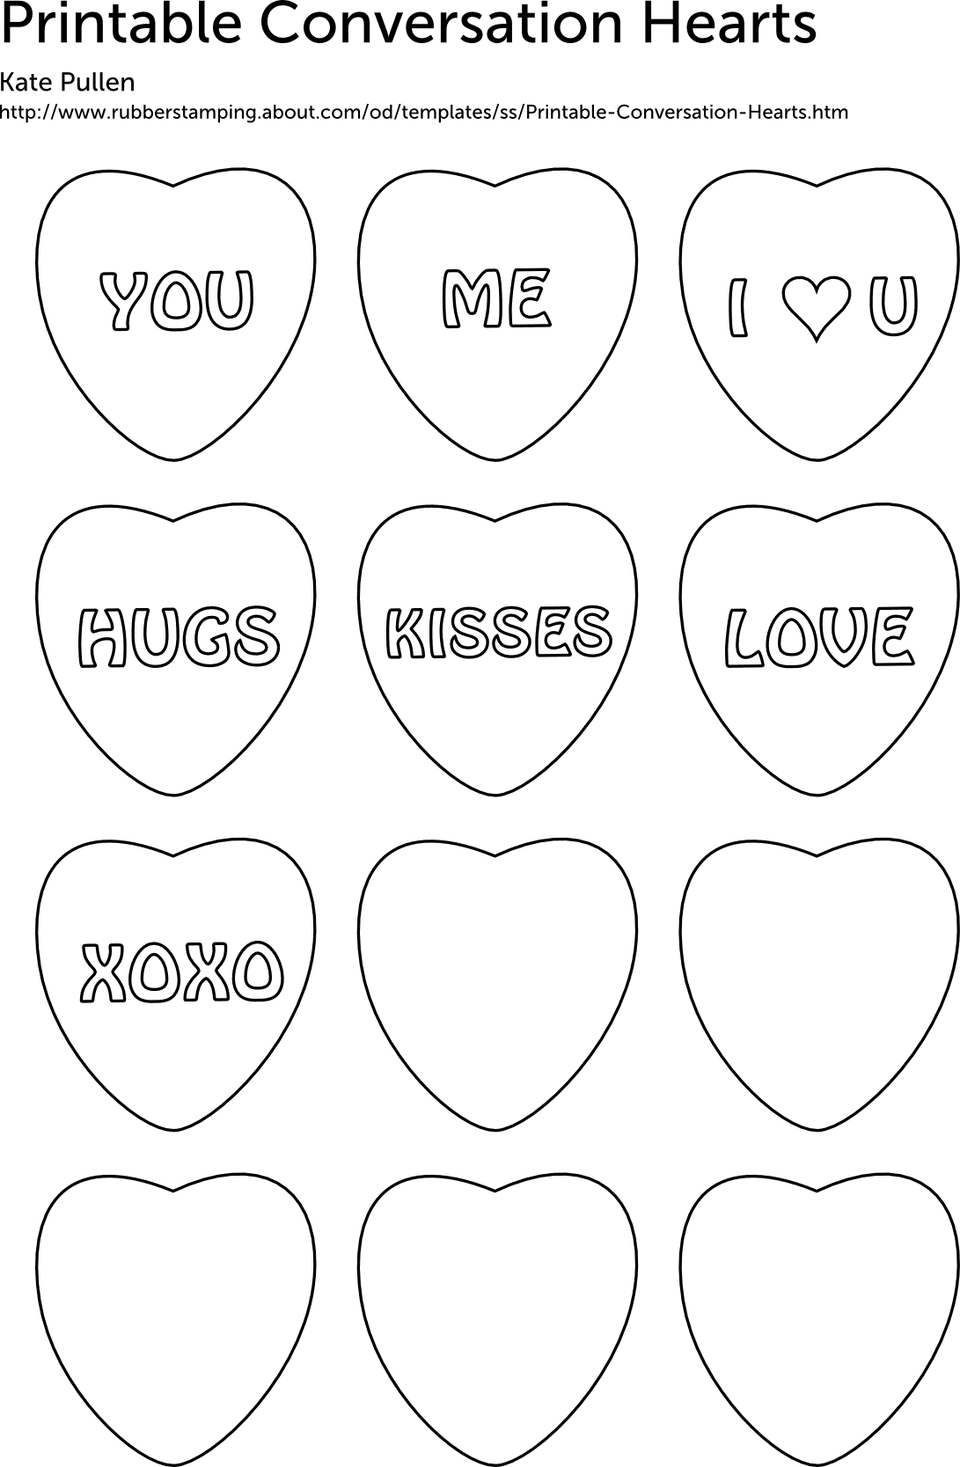 Free Printable Conversation Hearts For Valentine s Day